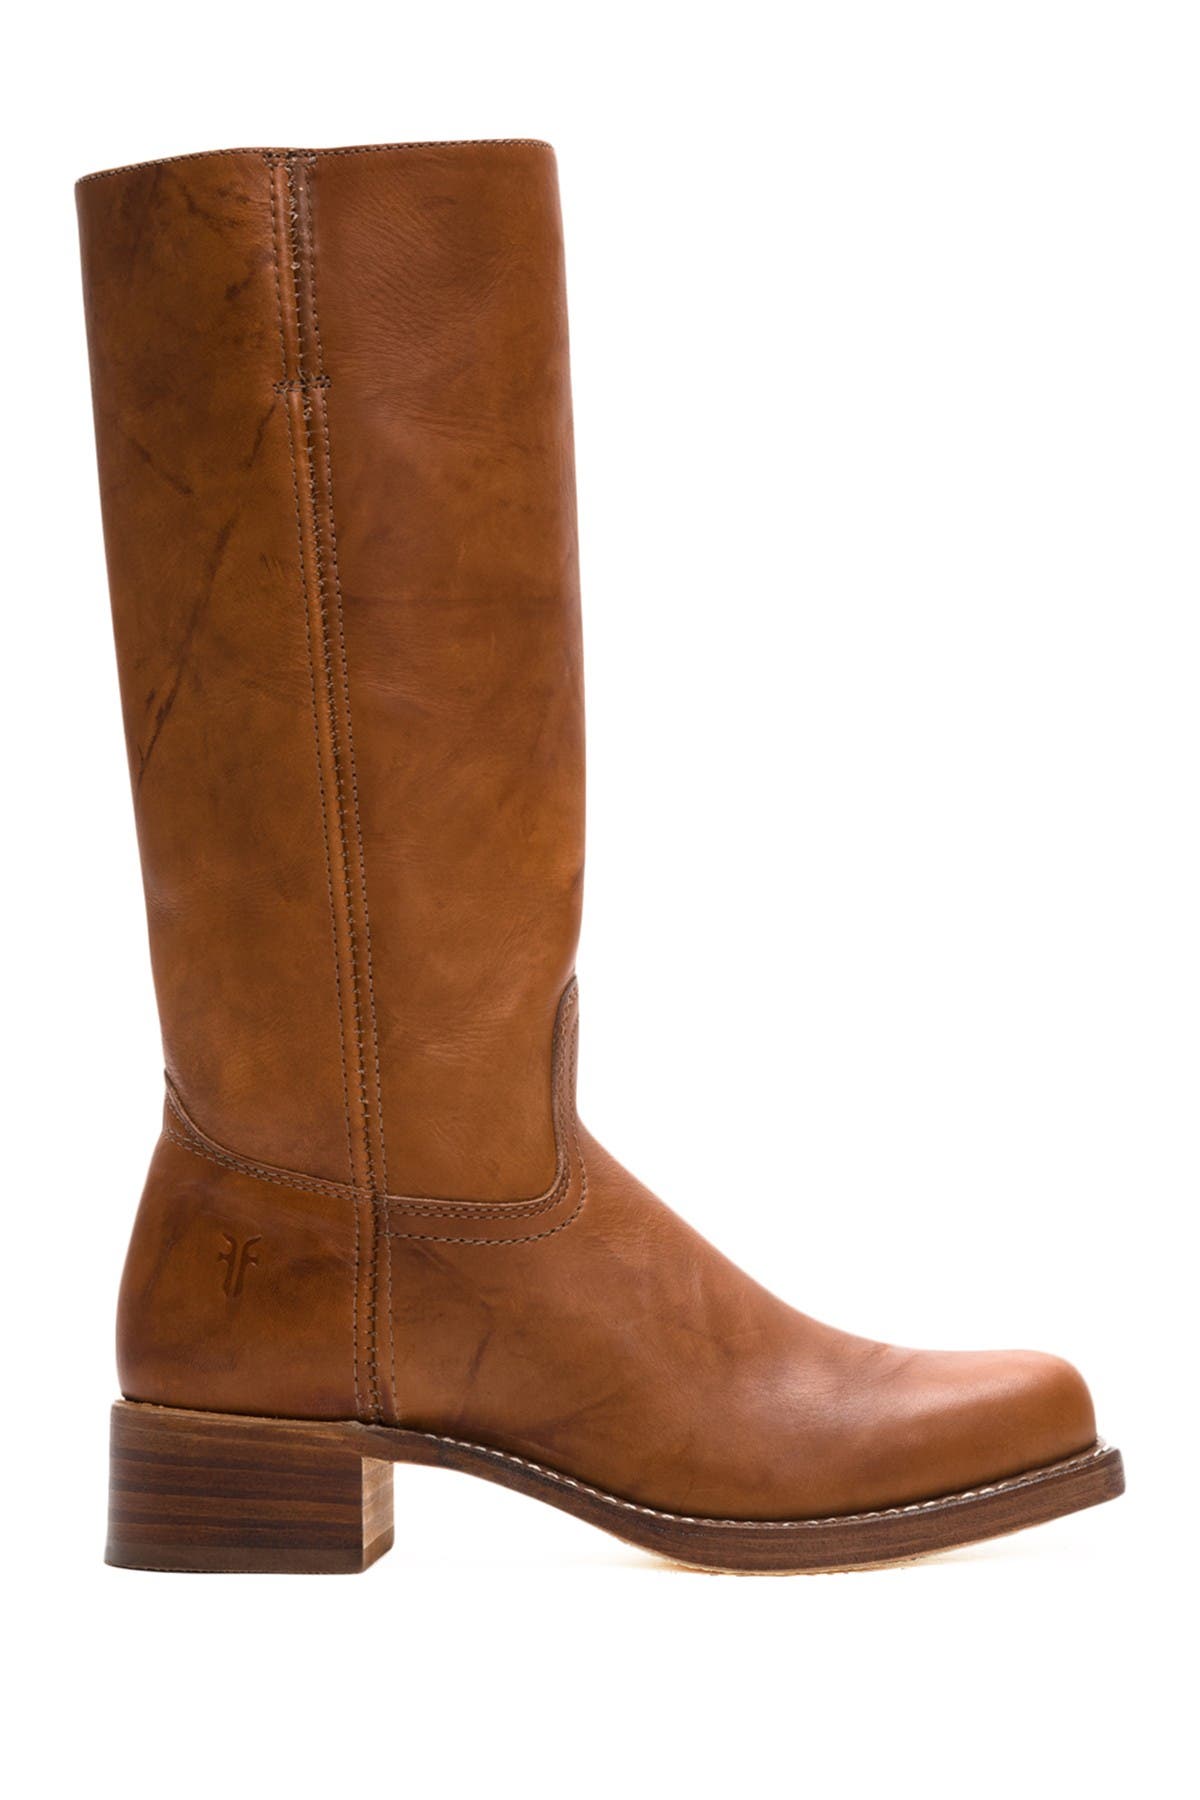 frye campus boot